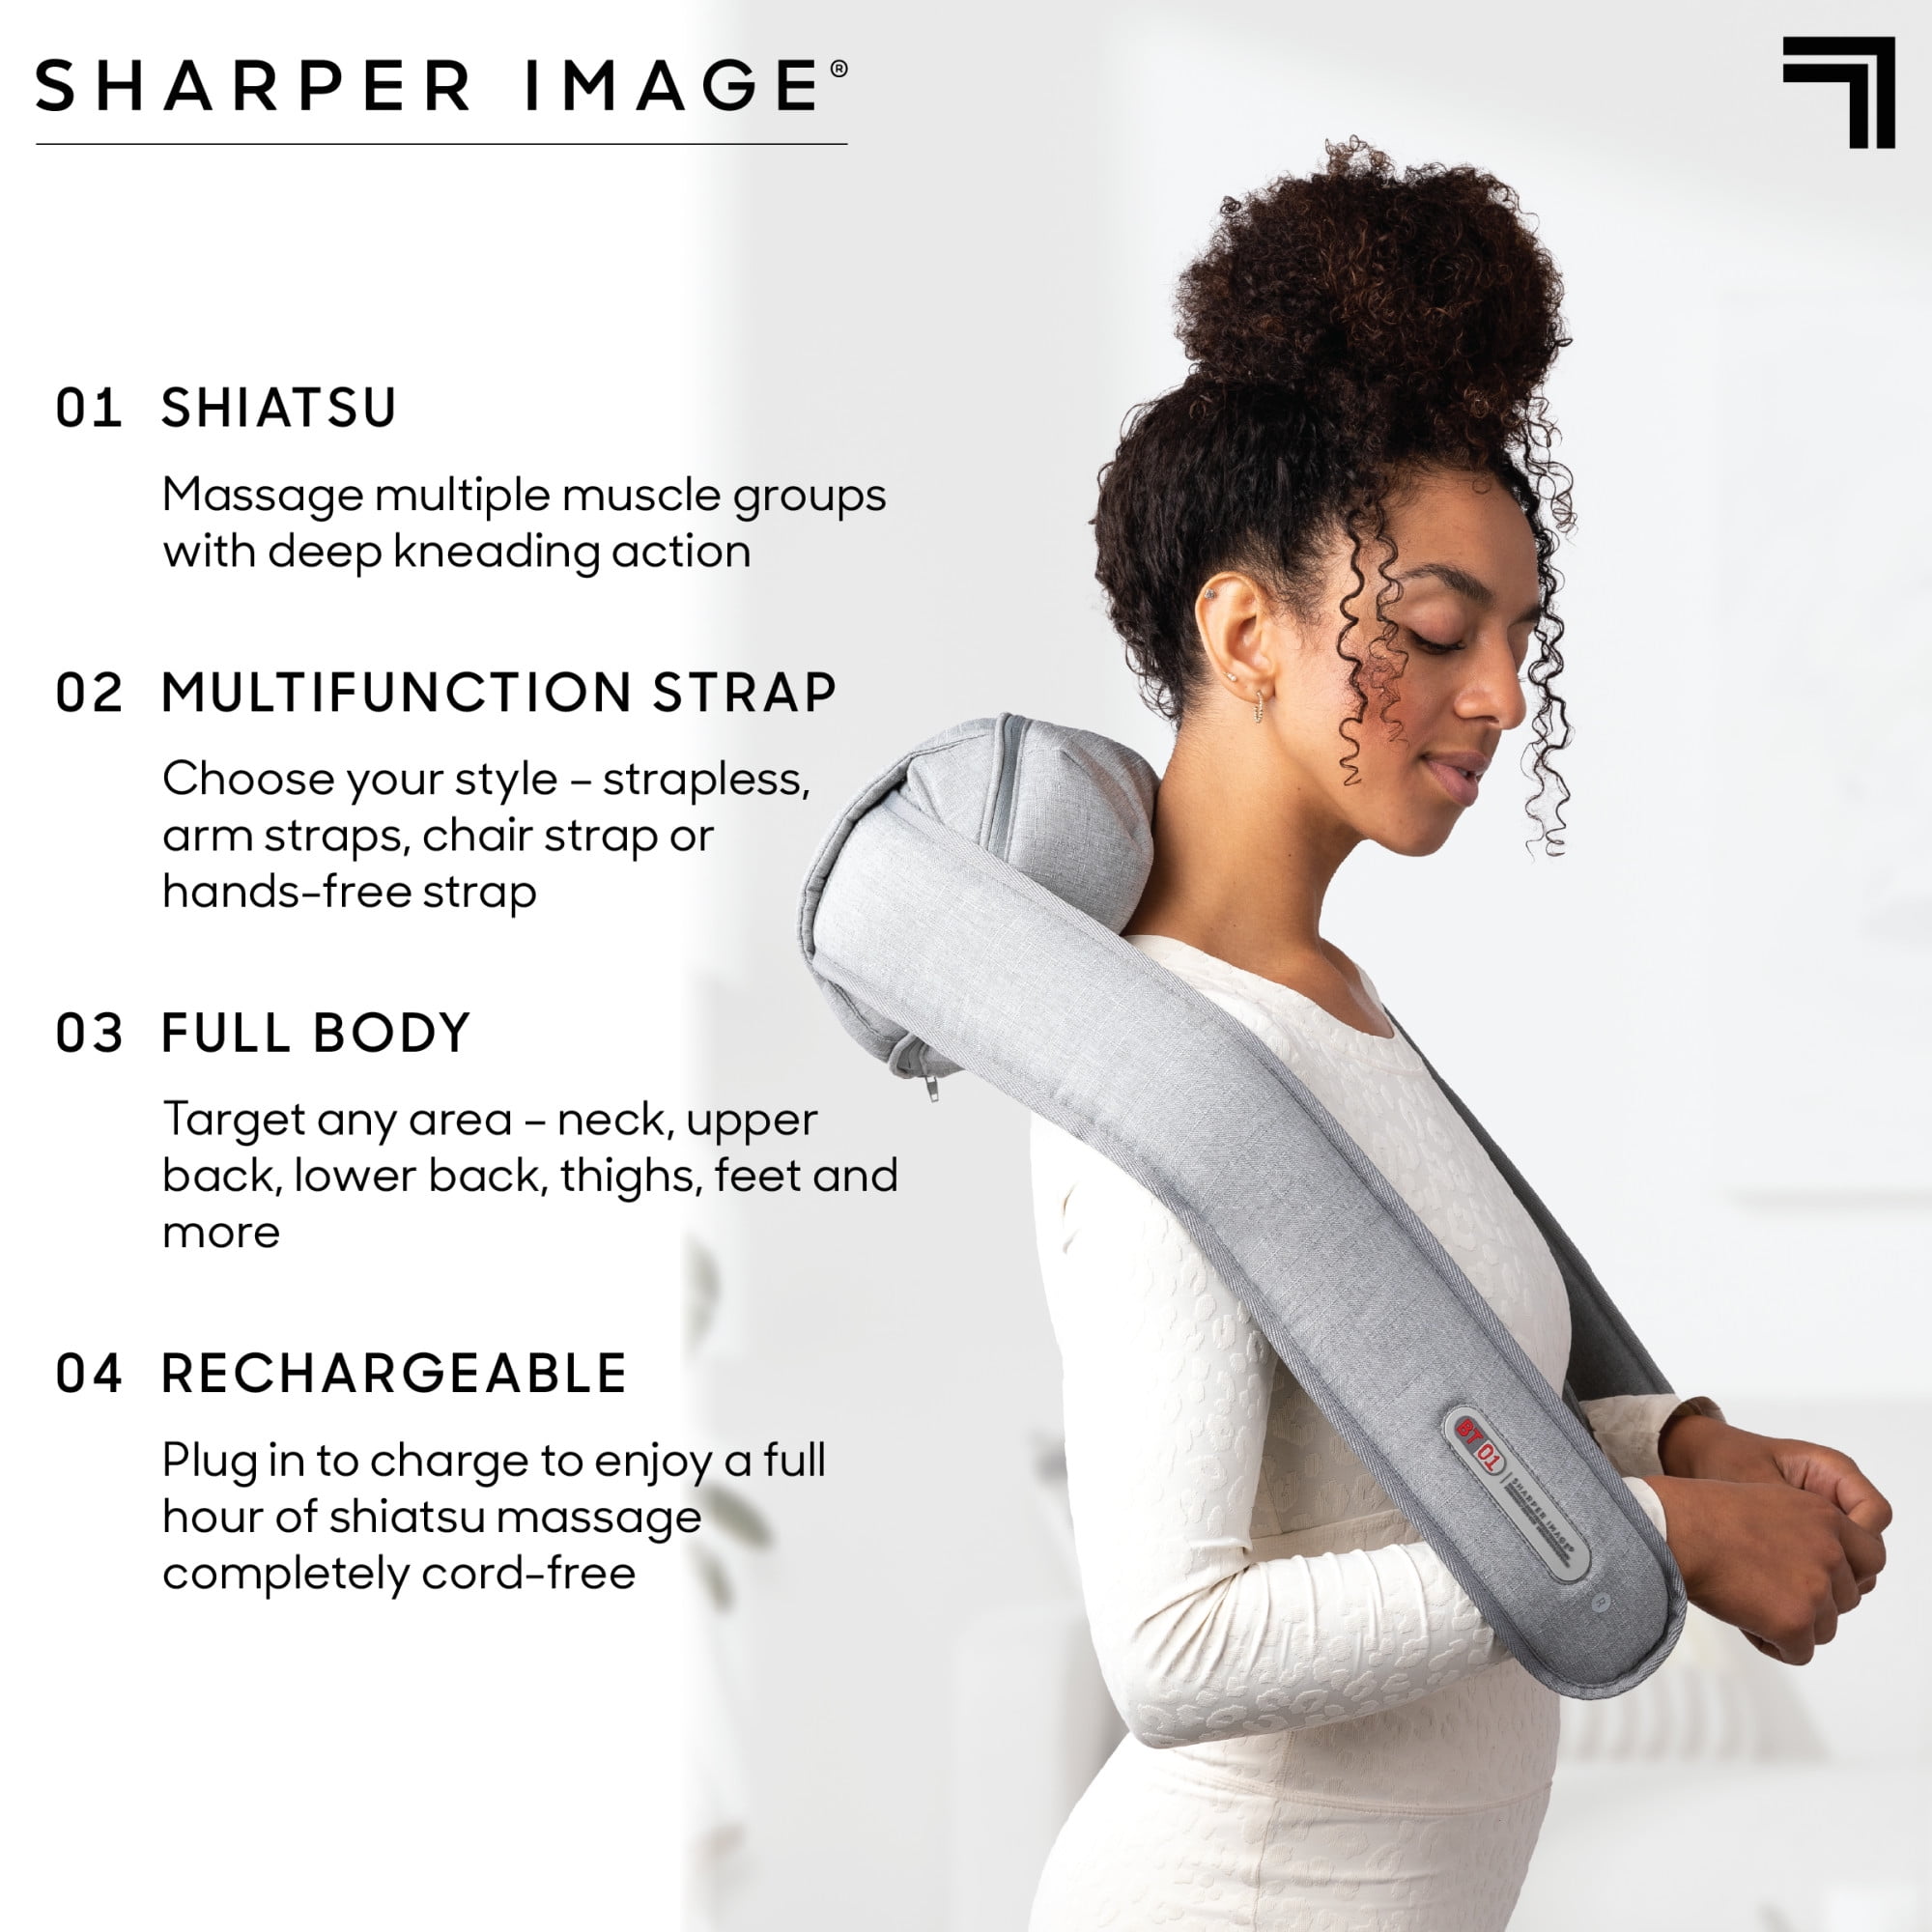 Sharper Image Shiatsu Full Body Multifunction Cordless Massager For Neck And Back Relaxation